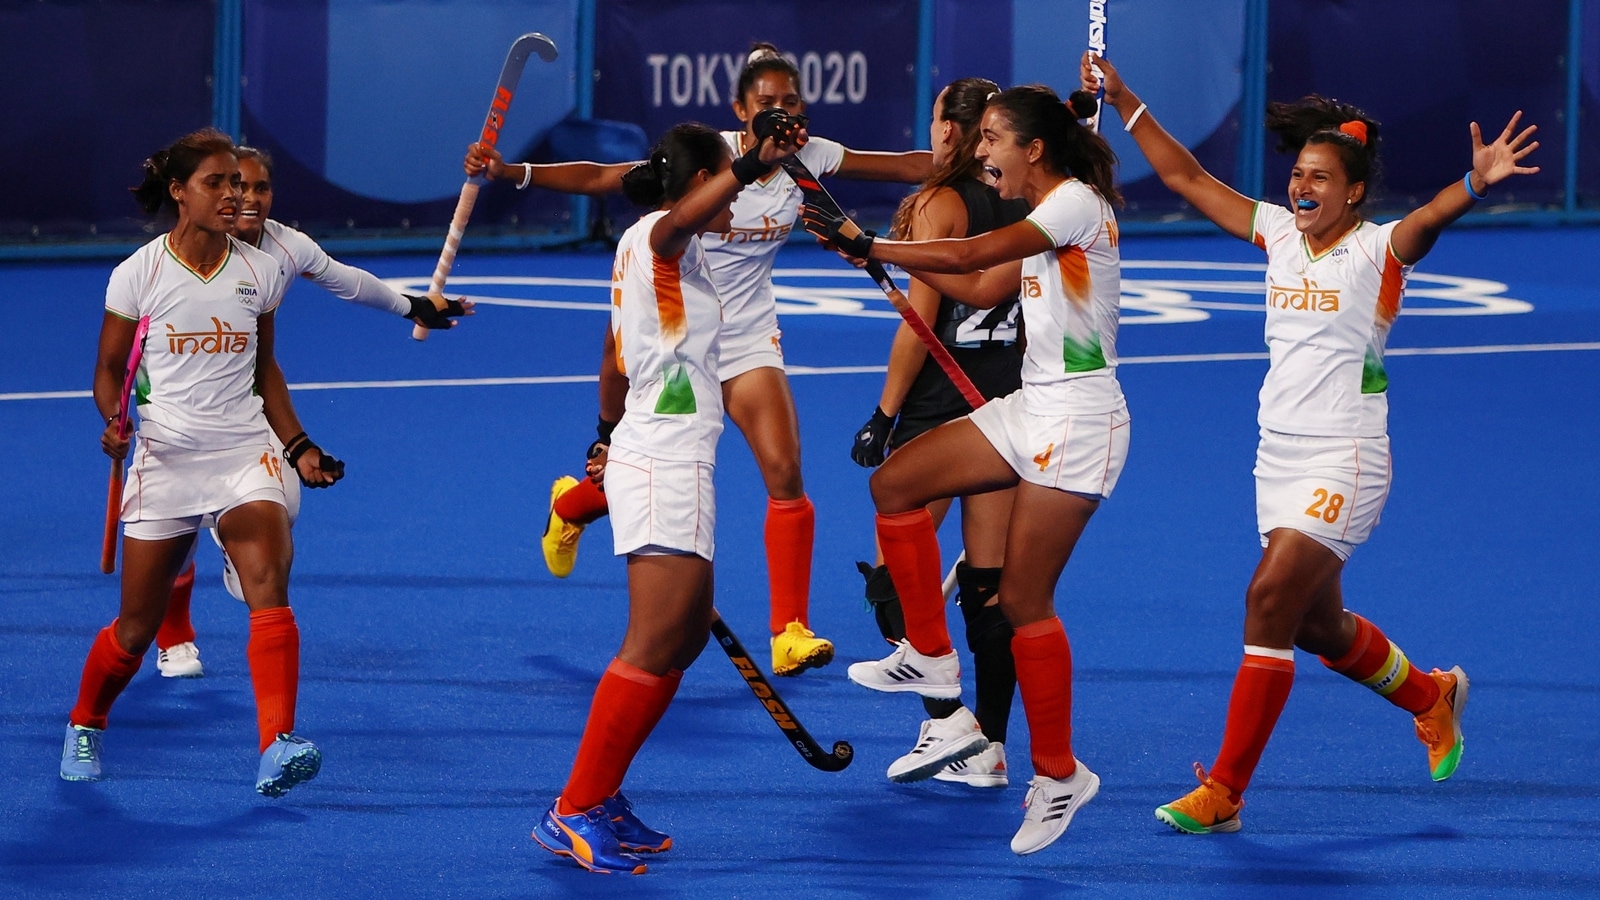 womens hockey match today live streaming